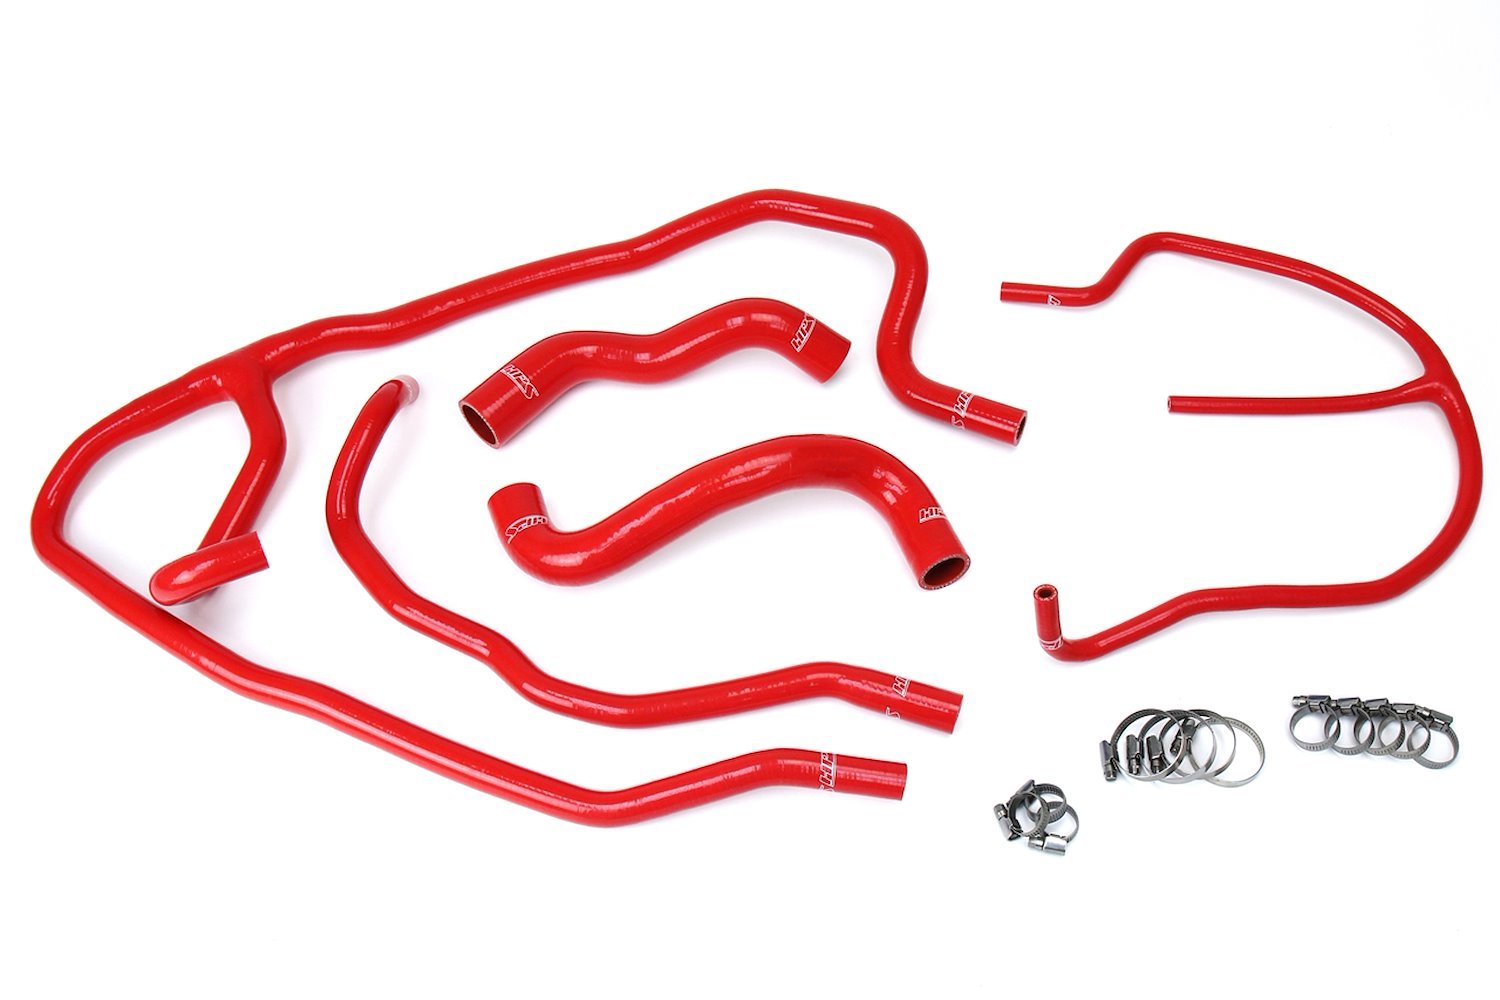 57-1276-RED Coolant Hose Kit, High-Temp 3-Ply Reinforced Silicone, Replace Rubber Radiator Heater Coolant Hoses